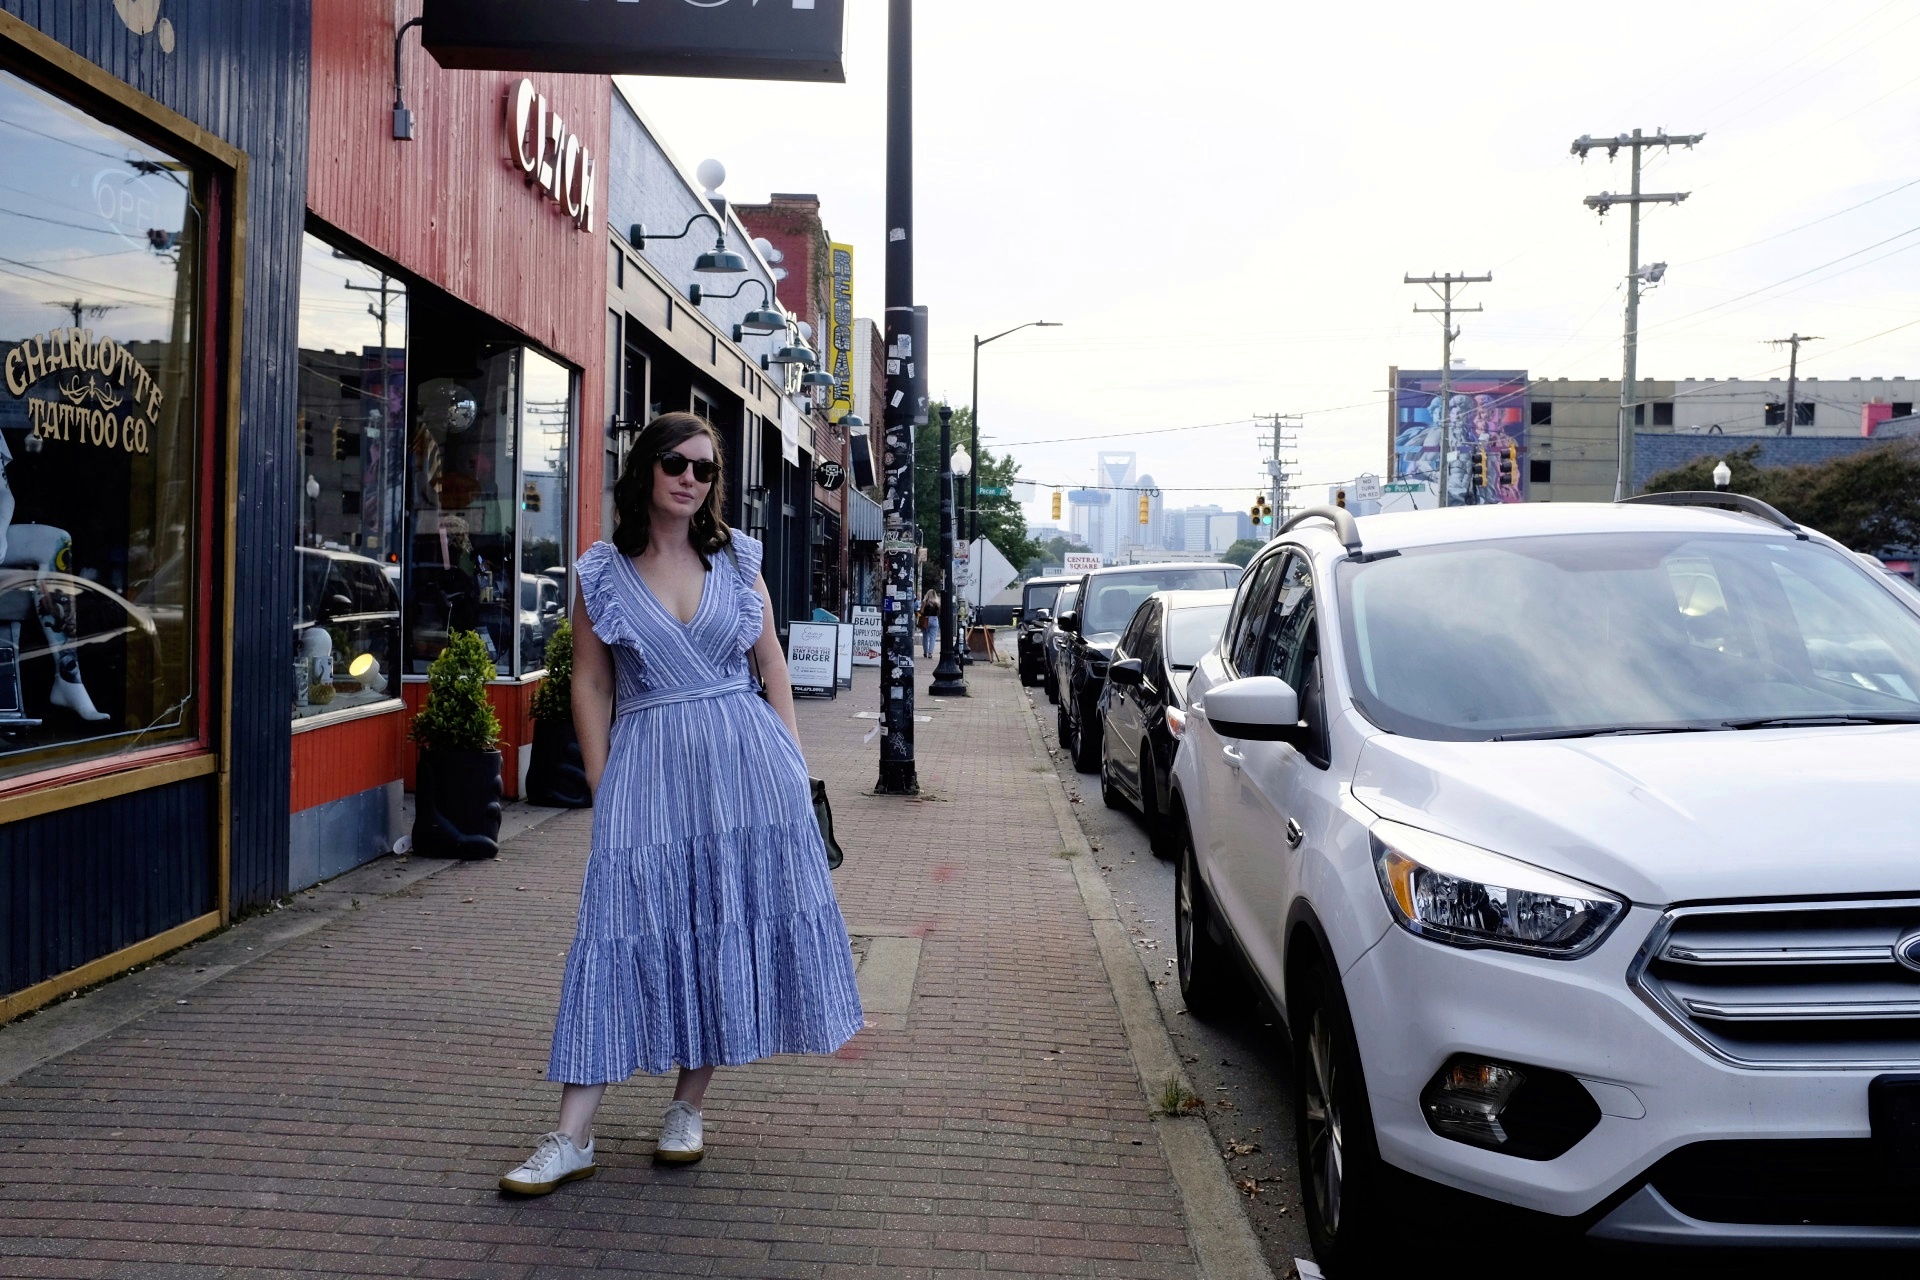 Alyssa stands next to cars on the sidewalk in Plaza Midwood